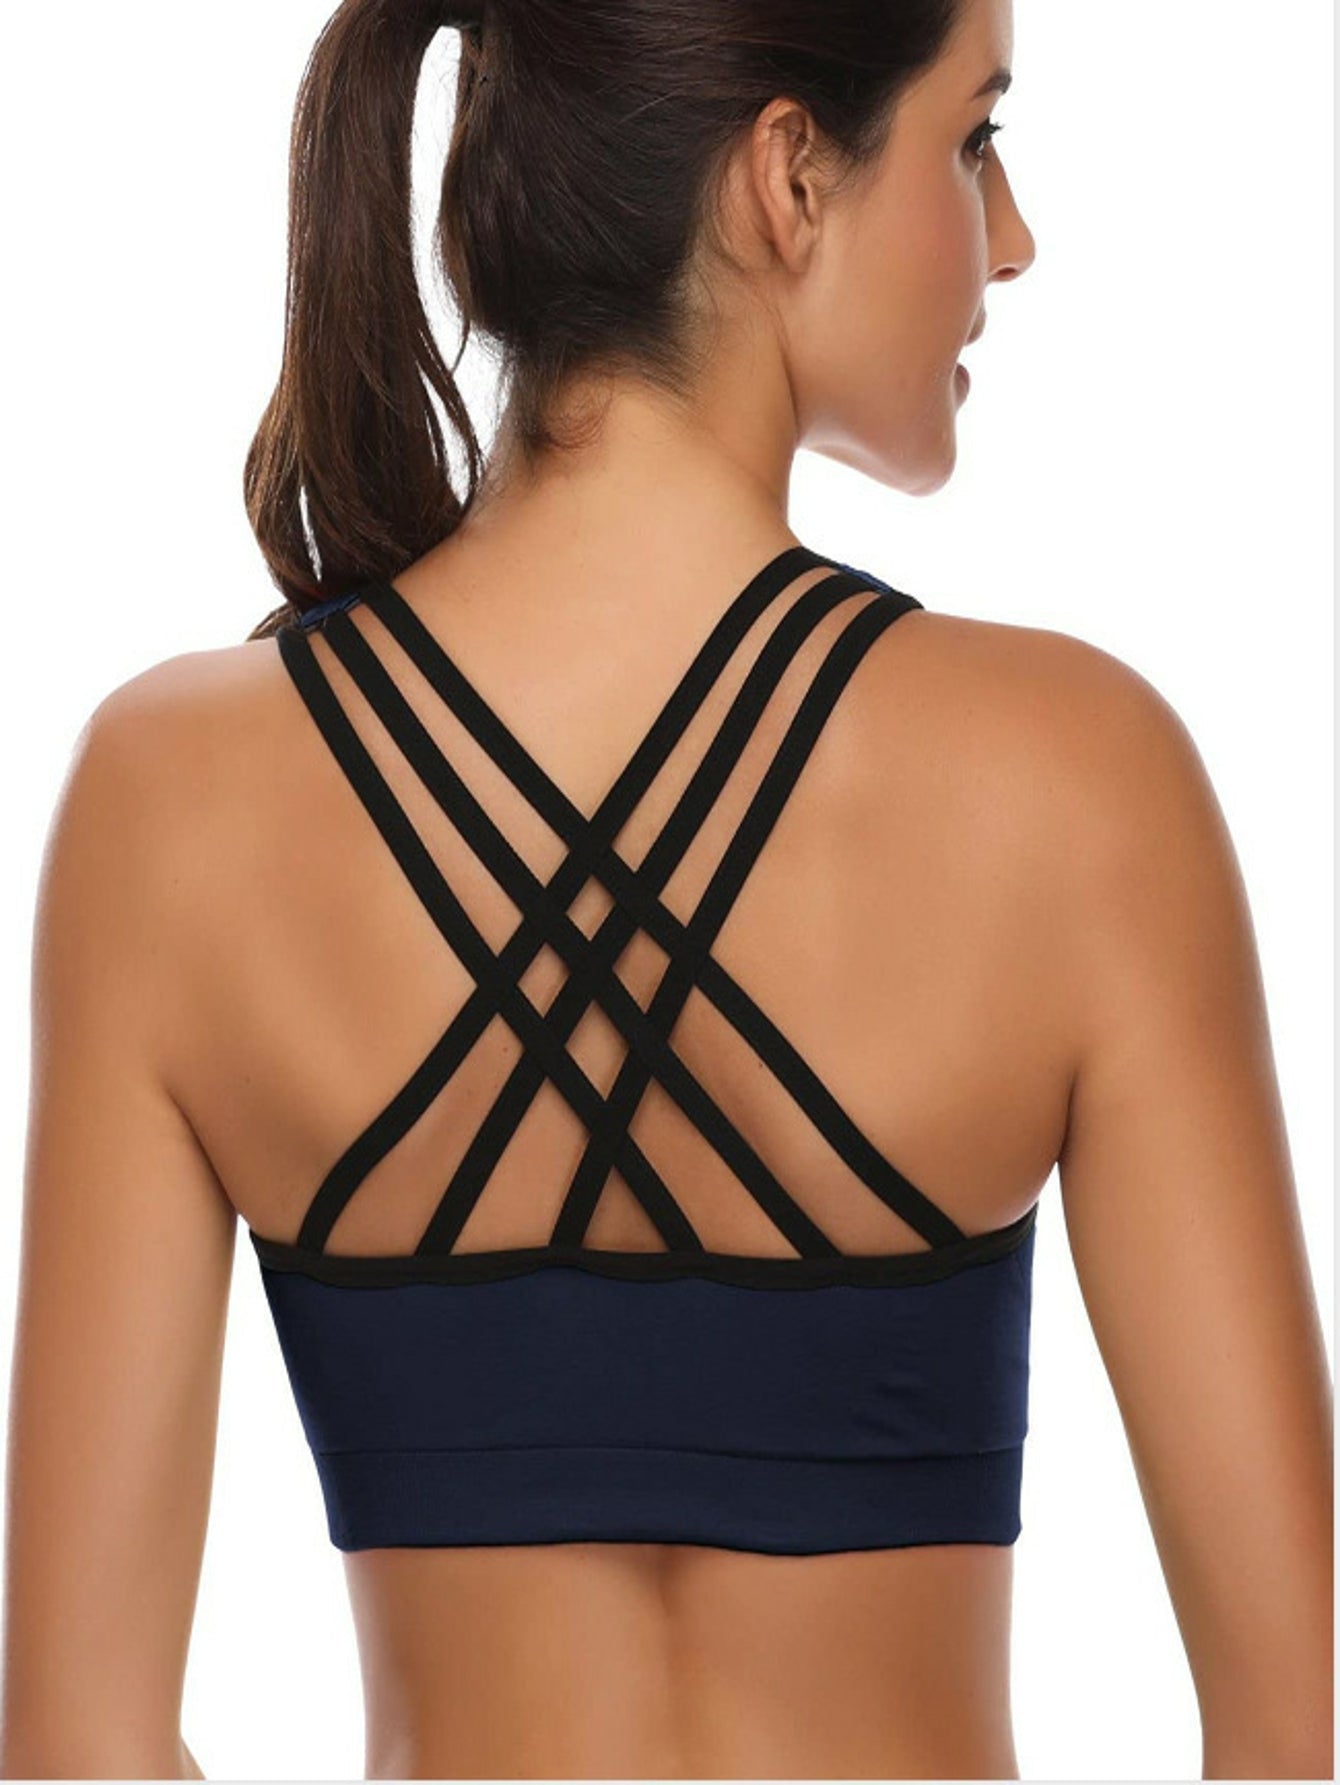 Womnen's Sexy Sport Bra Three Back Shoulder Straps with Cup Crop Tops Sai Feel